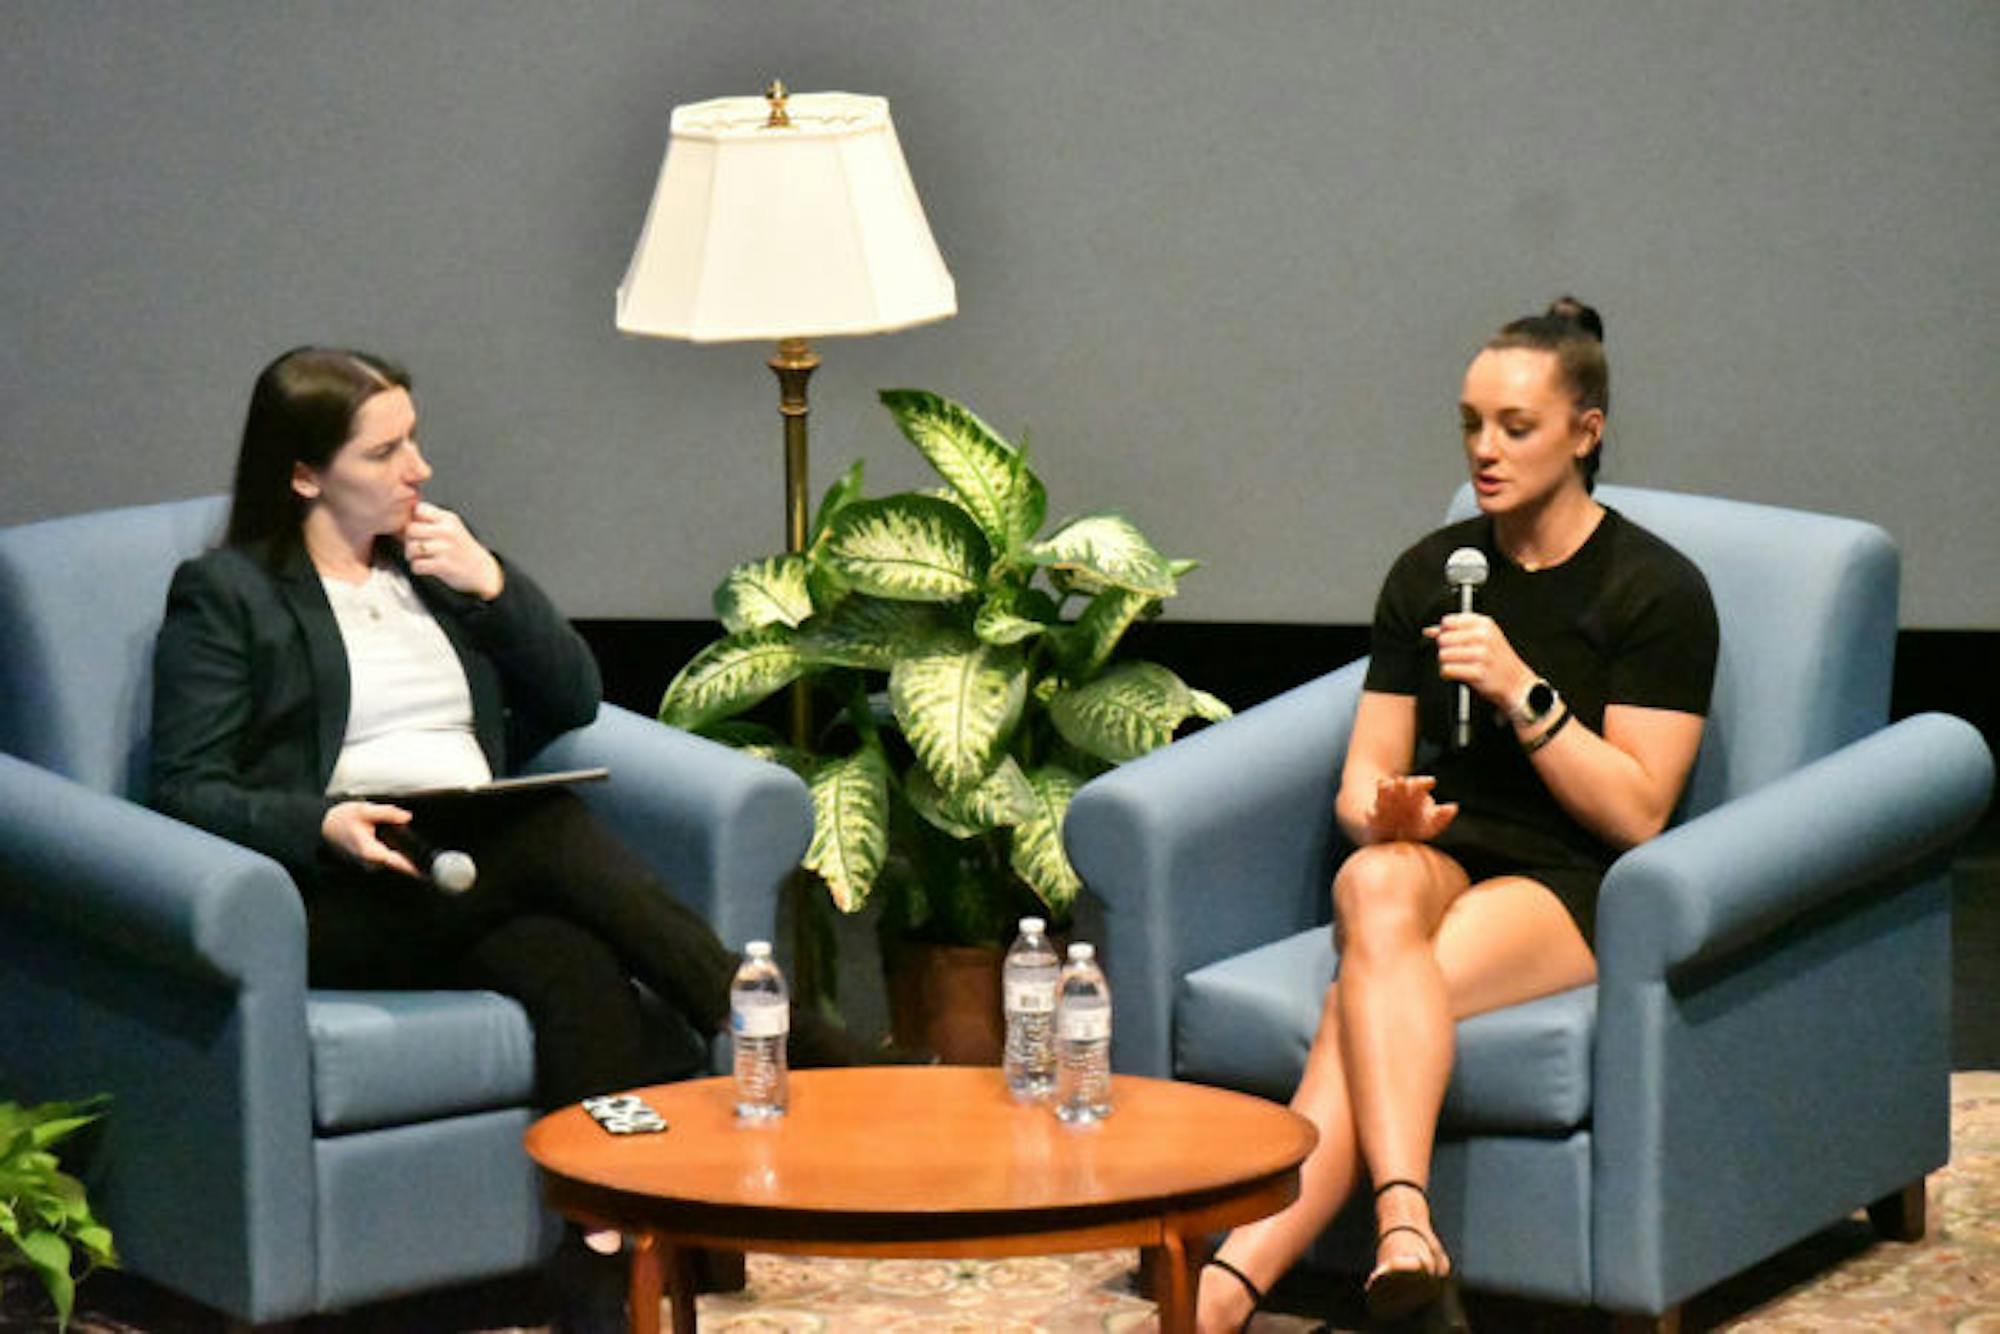 Maggie Nichols, known as “Athlete A” in the Larry Nassar sexual abuse case, spoke at Saint Mary’s Monday evening.